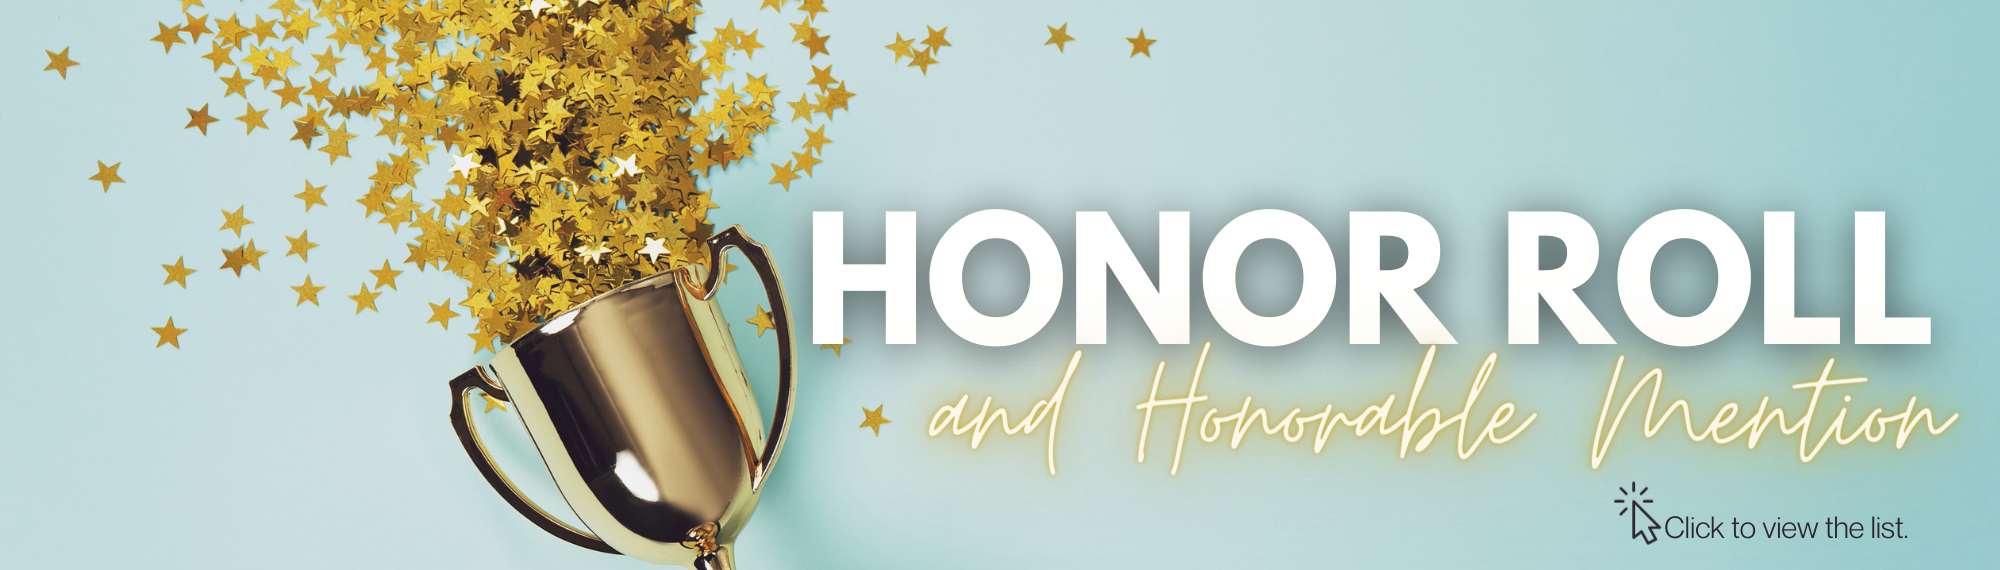 Honor Roll Banner